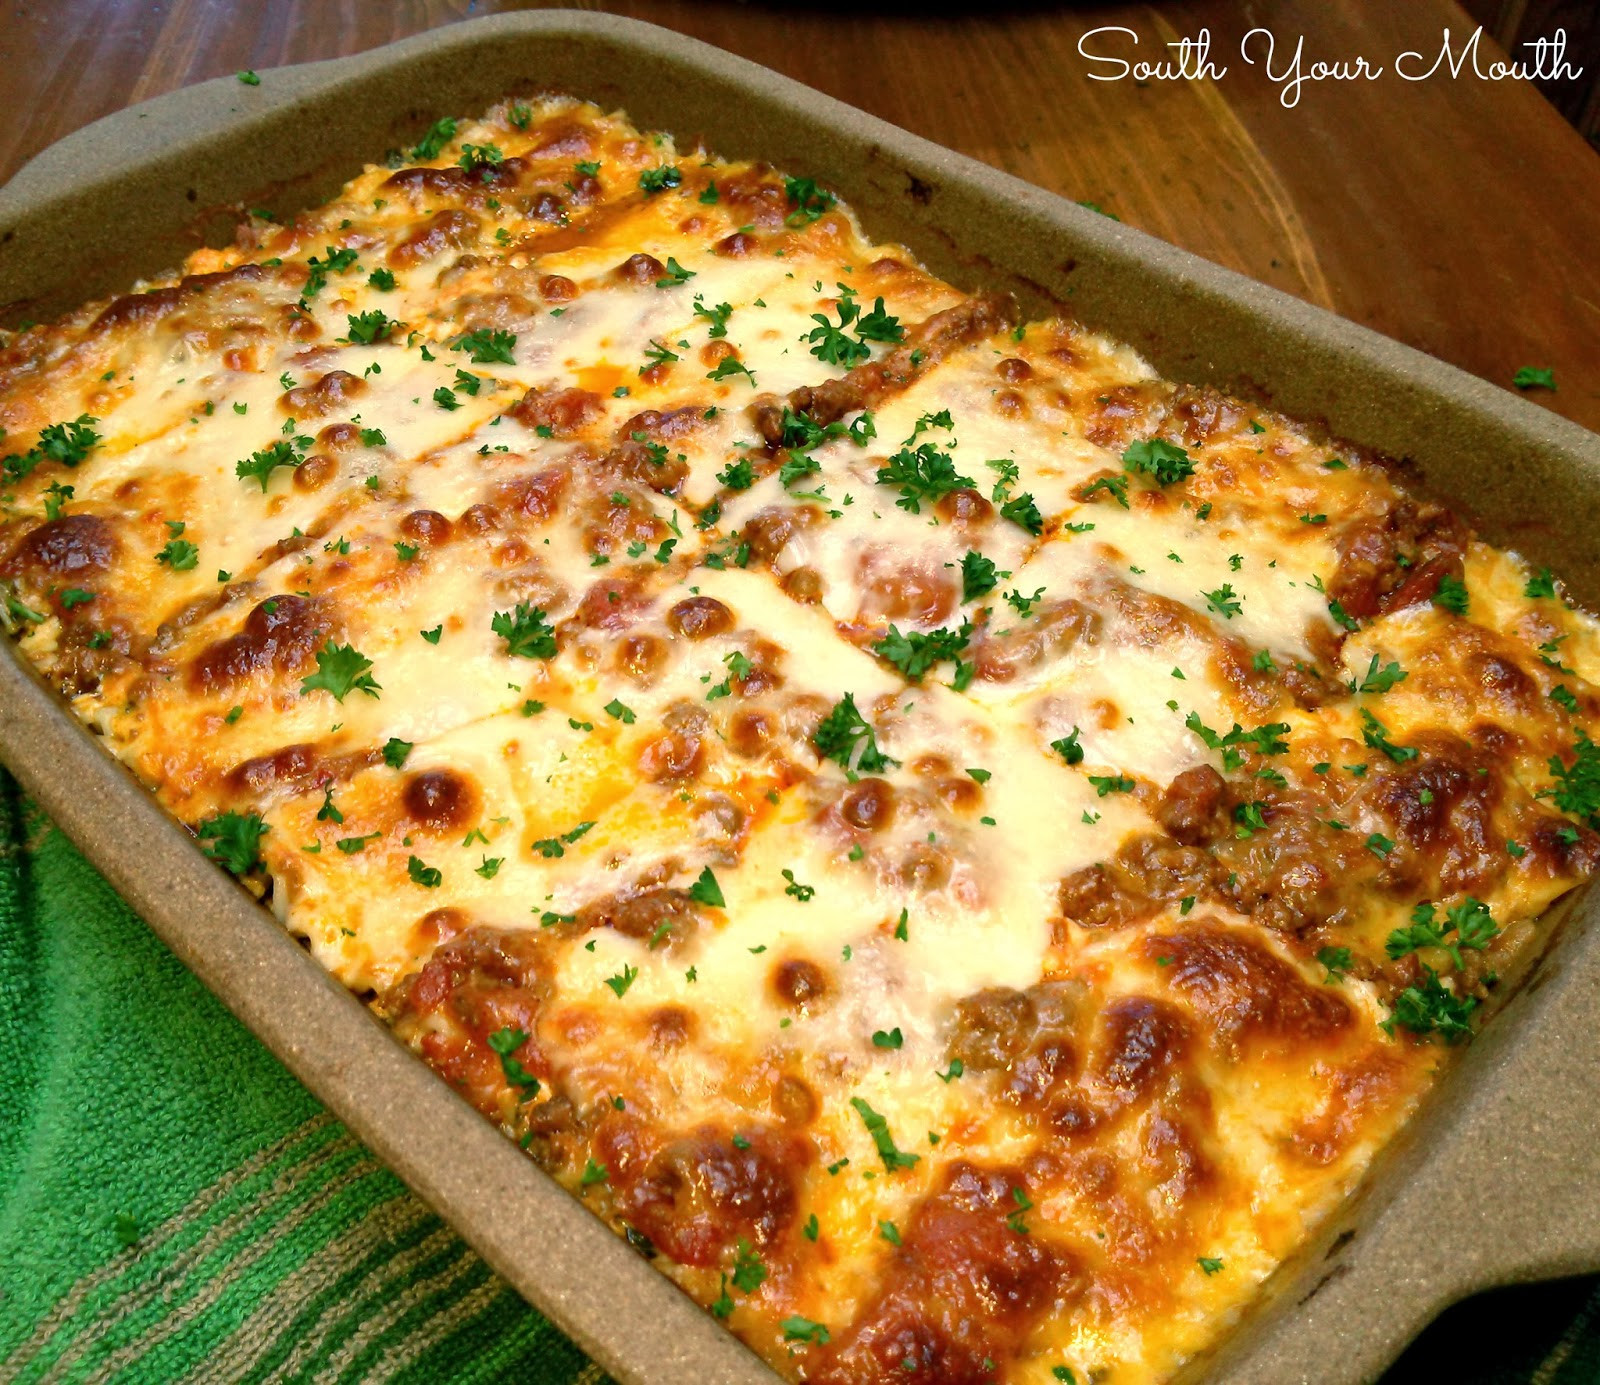 Lasagna Recipes Ground Beef
 South Your Mouth 10 Easy Meals Made with Ground Beef